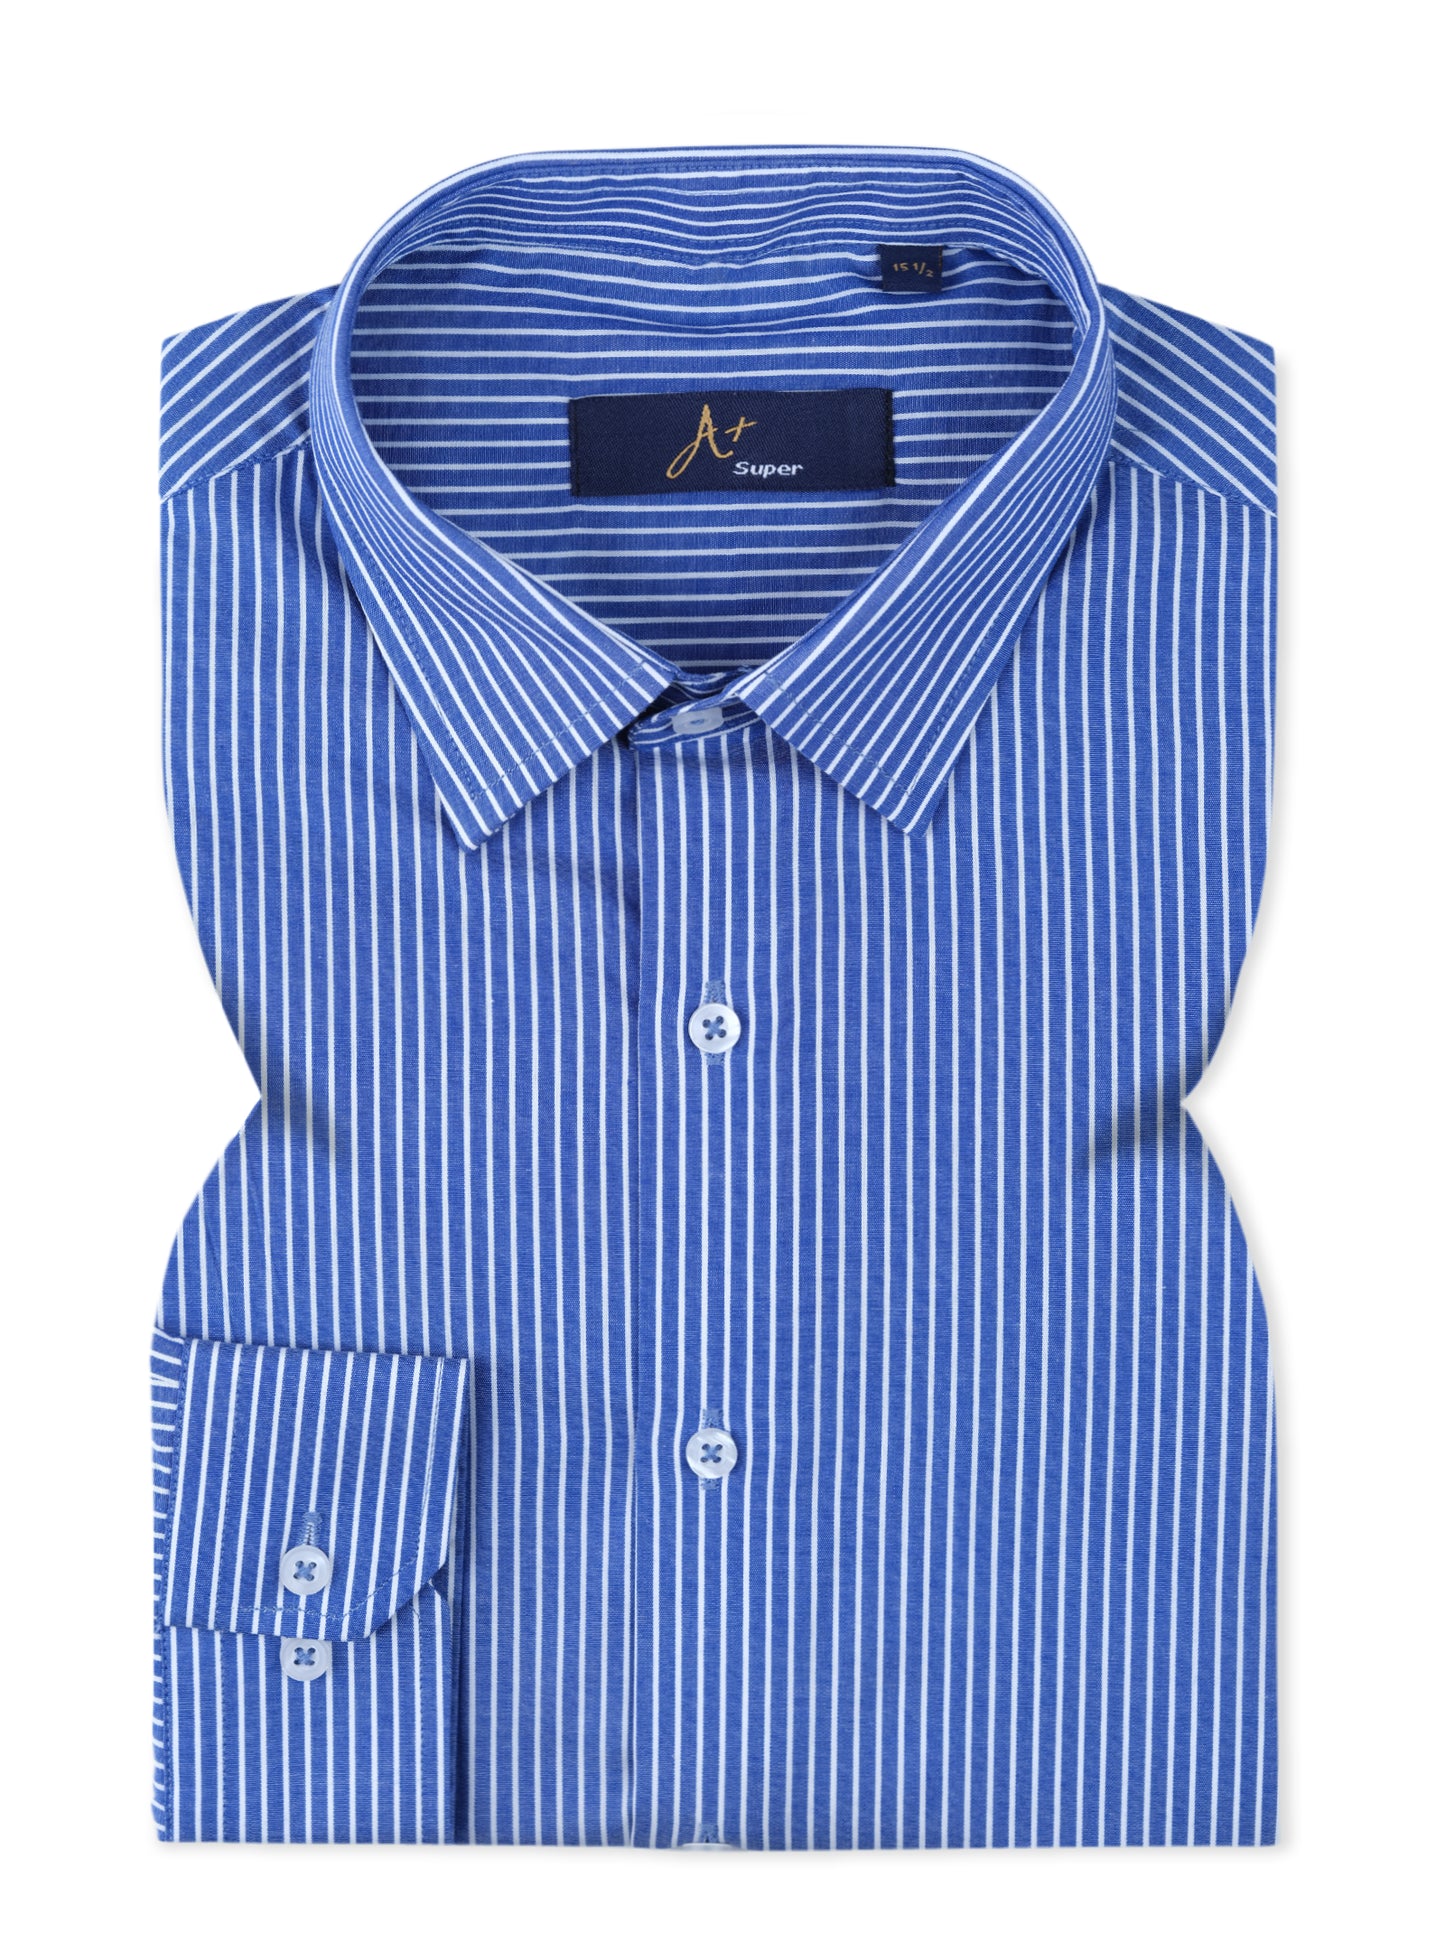 Blue with White Hairline Stripe Dress Shirt  Smart Fit